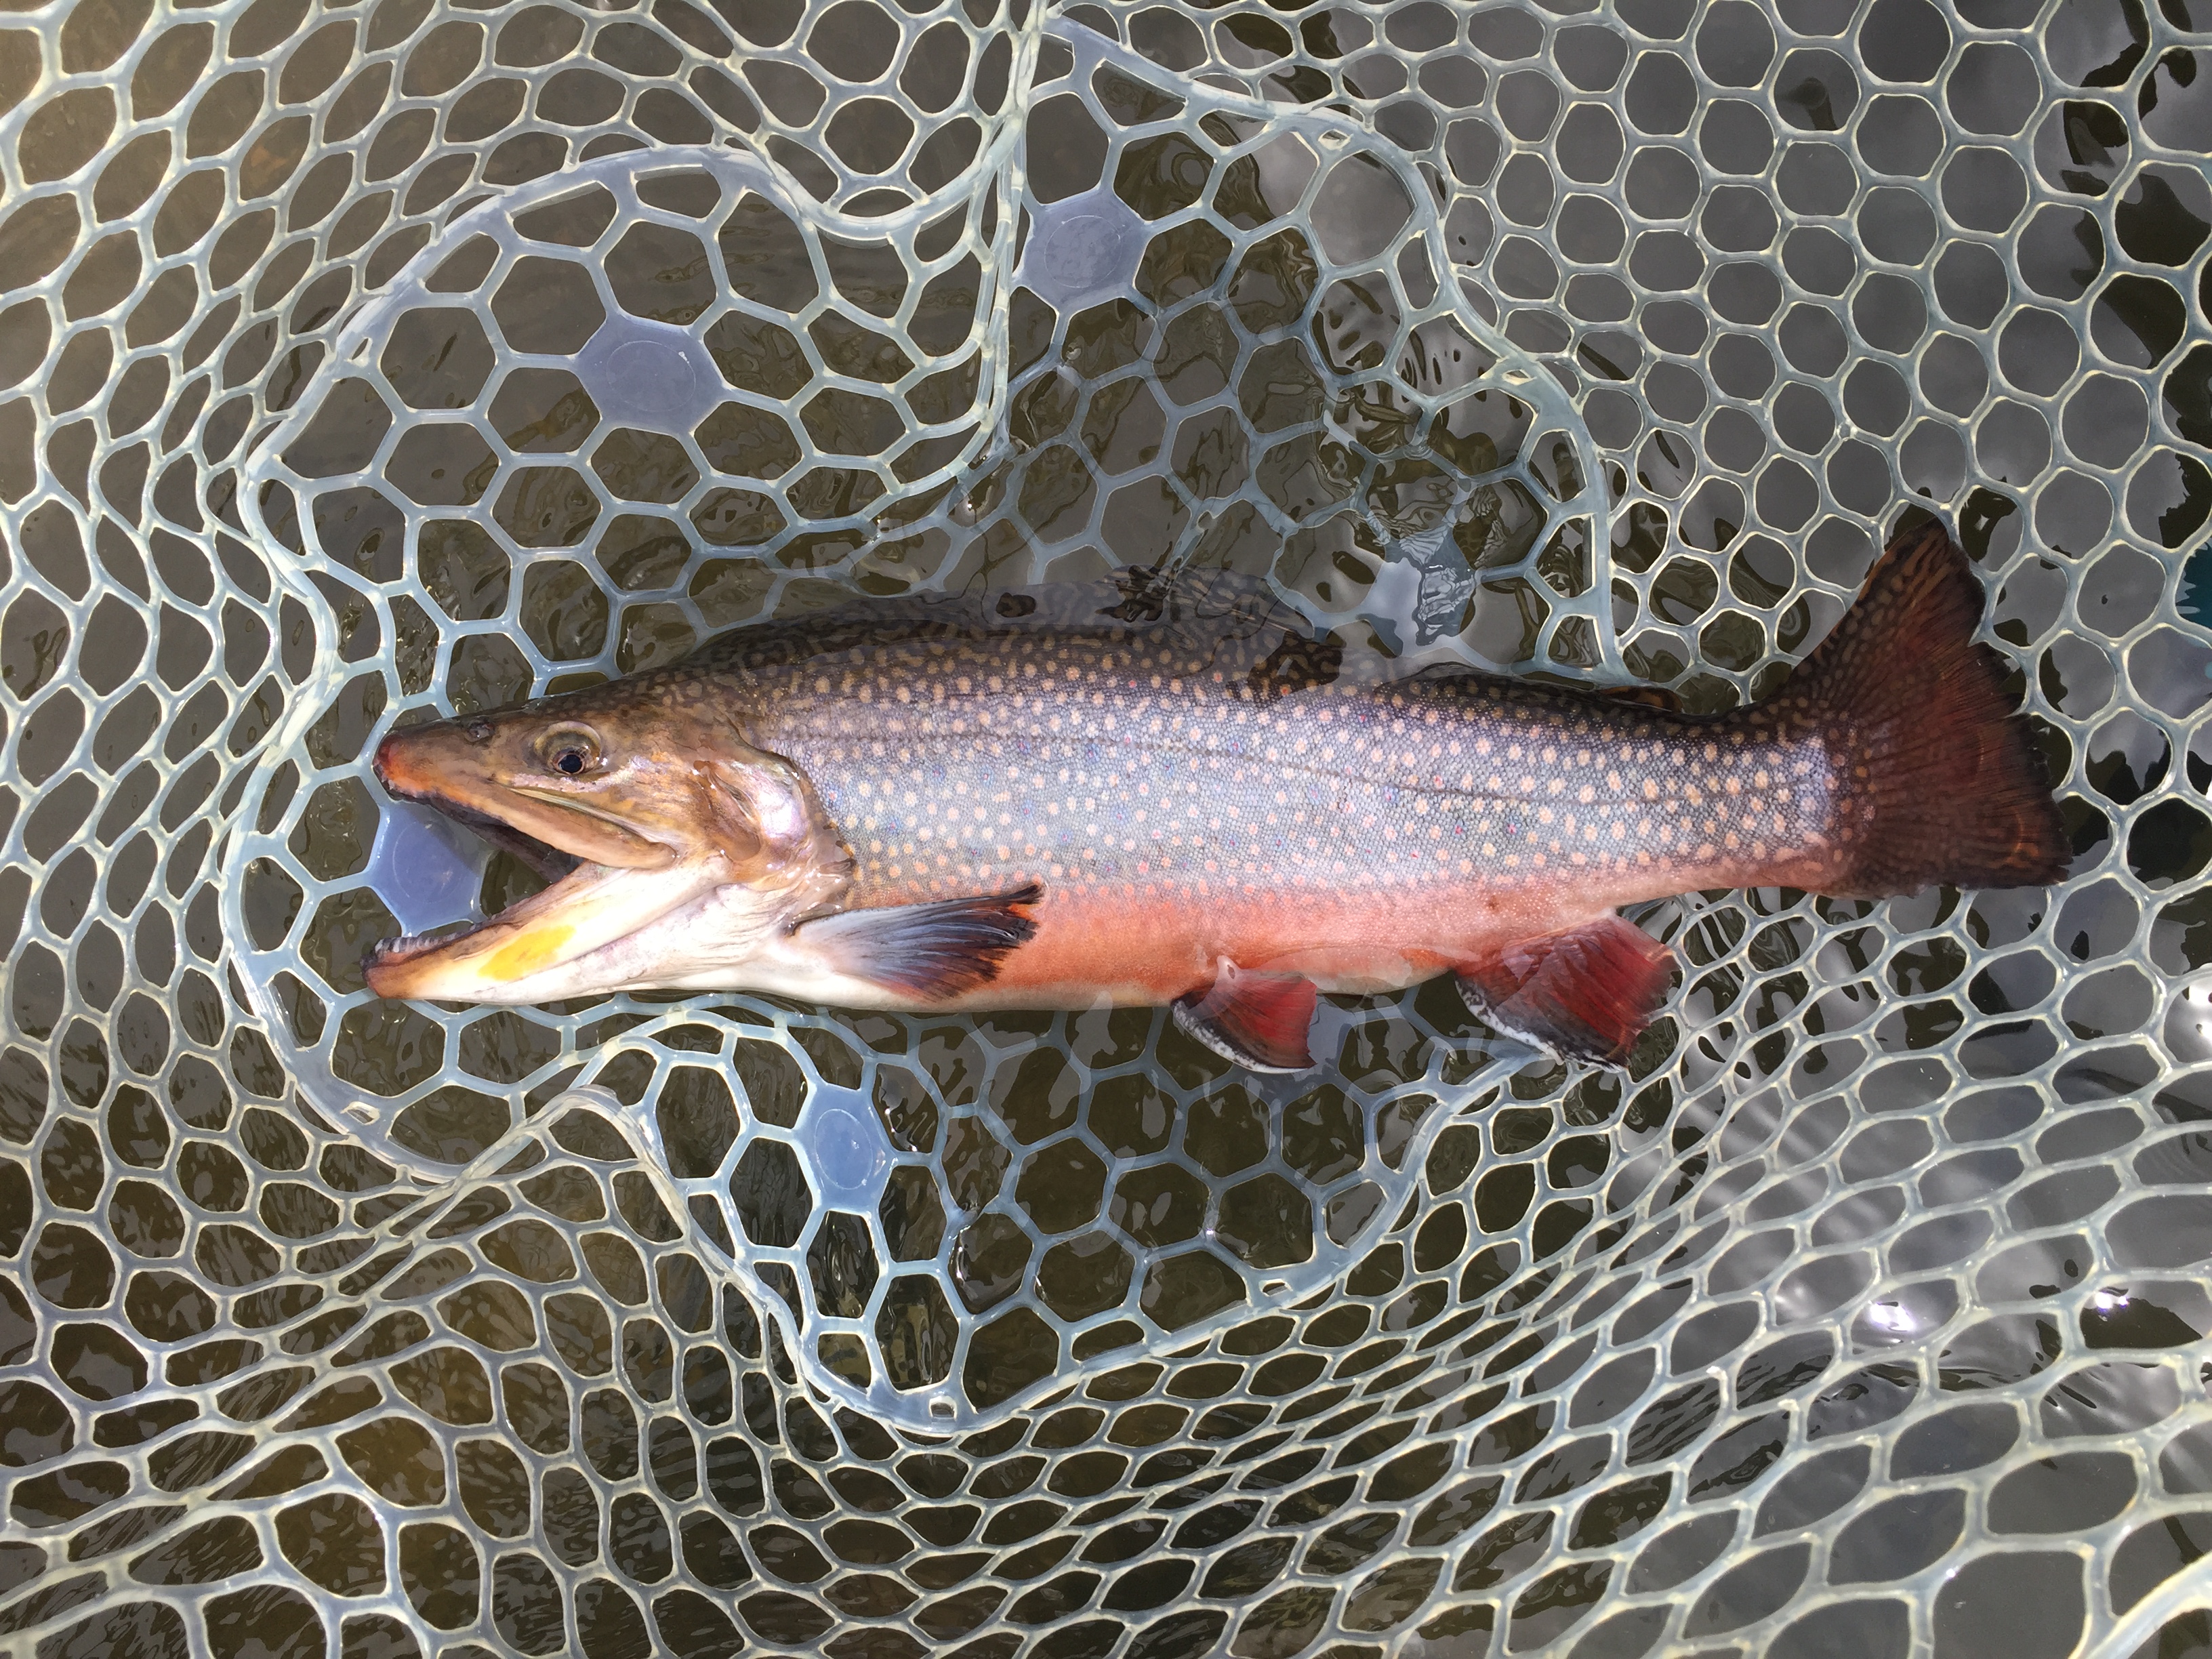 Trout Fishing Report for Foothills Western North Carolina